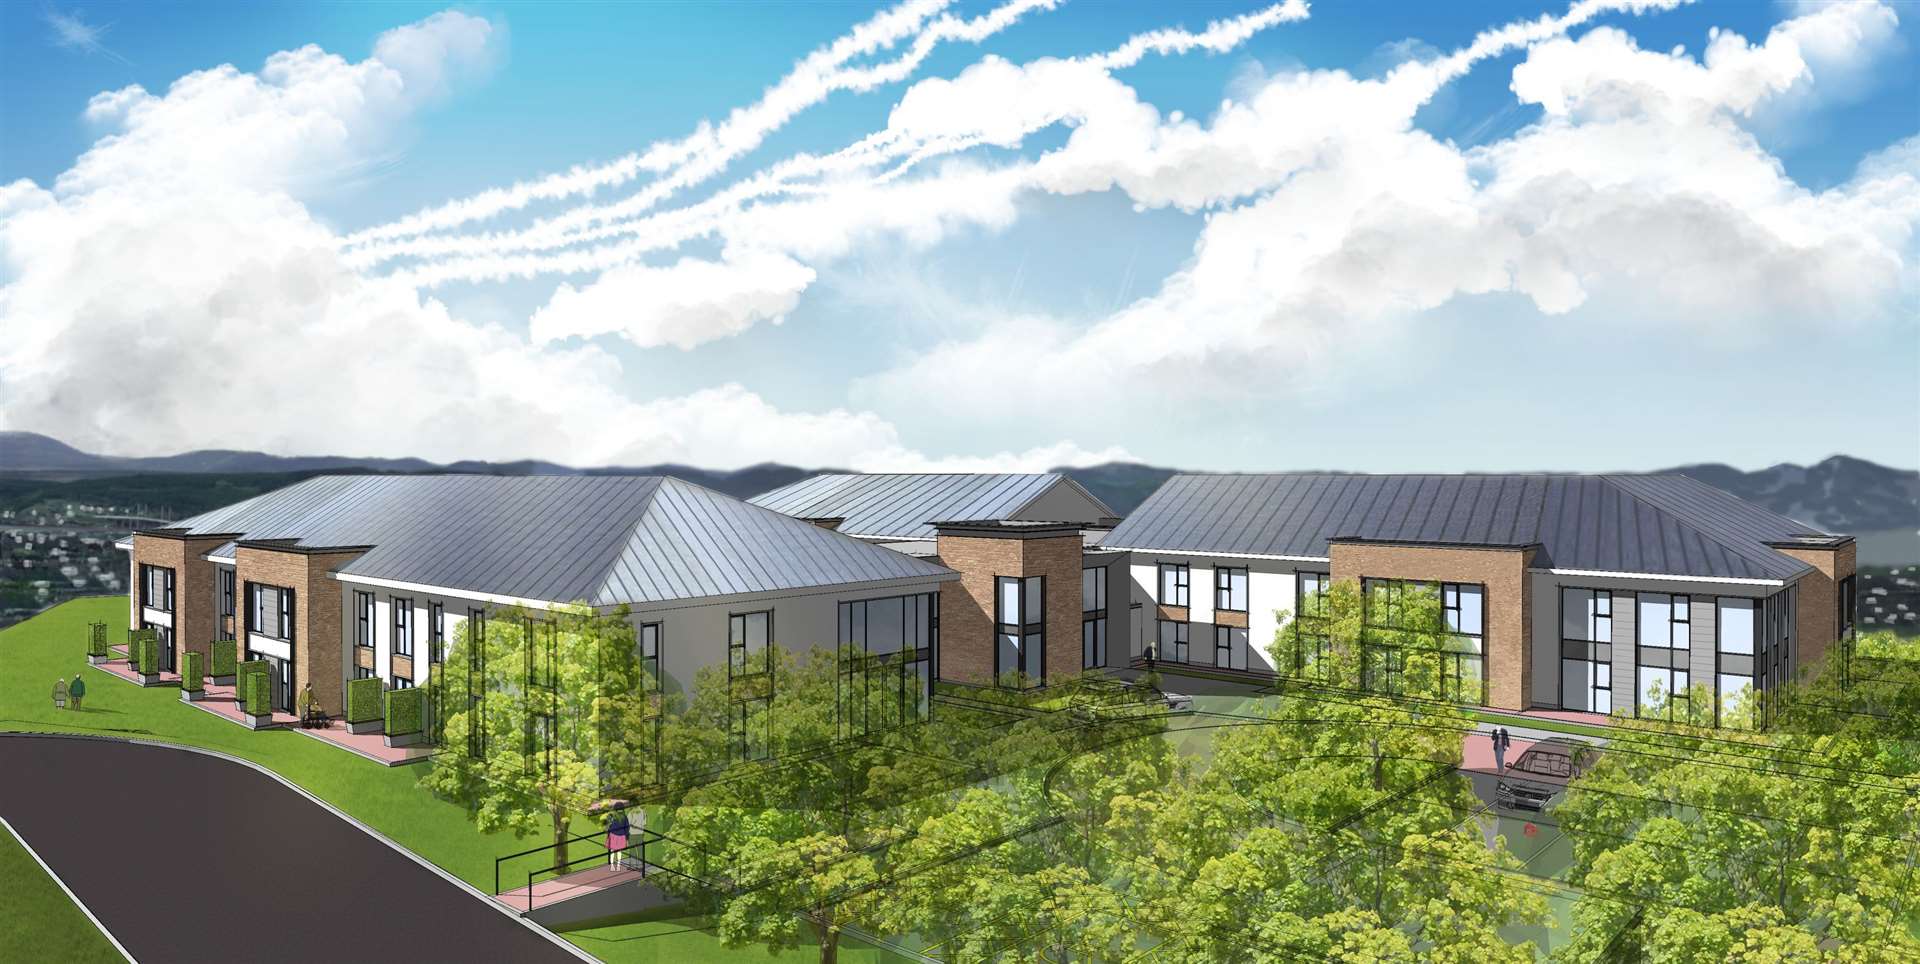 Plans for the new care home at Milton of Leyes are going ahead.